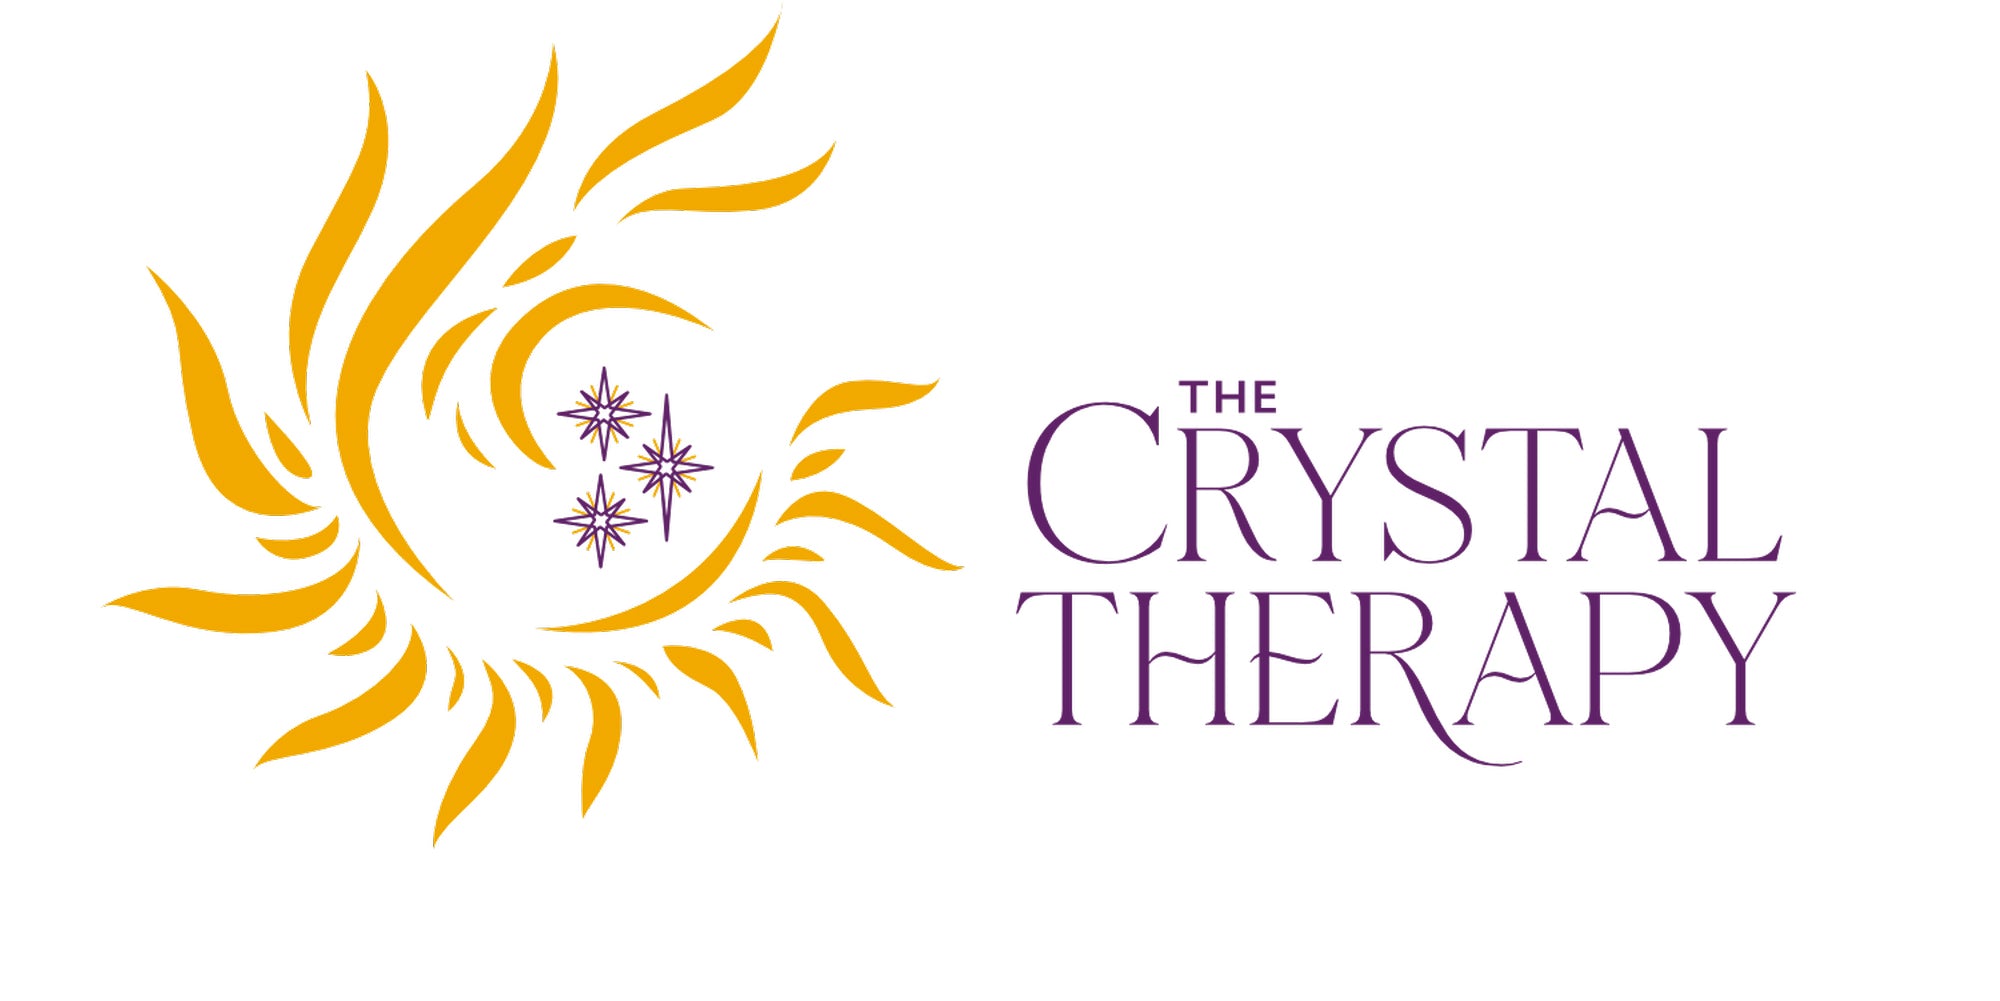 The Crystal Therapy